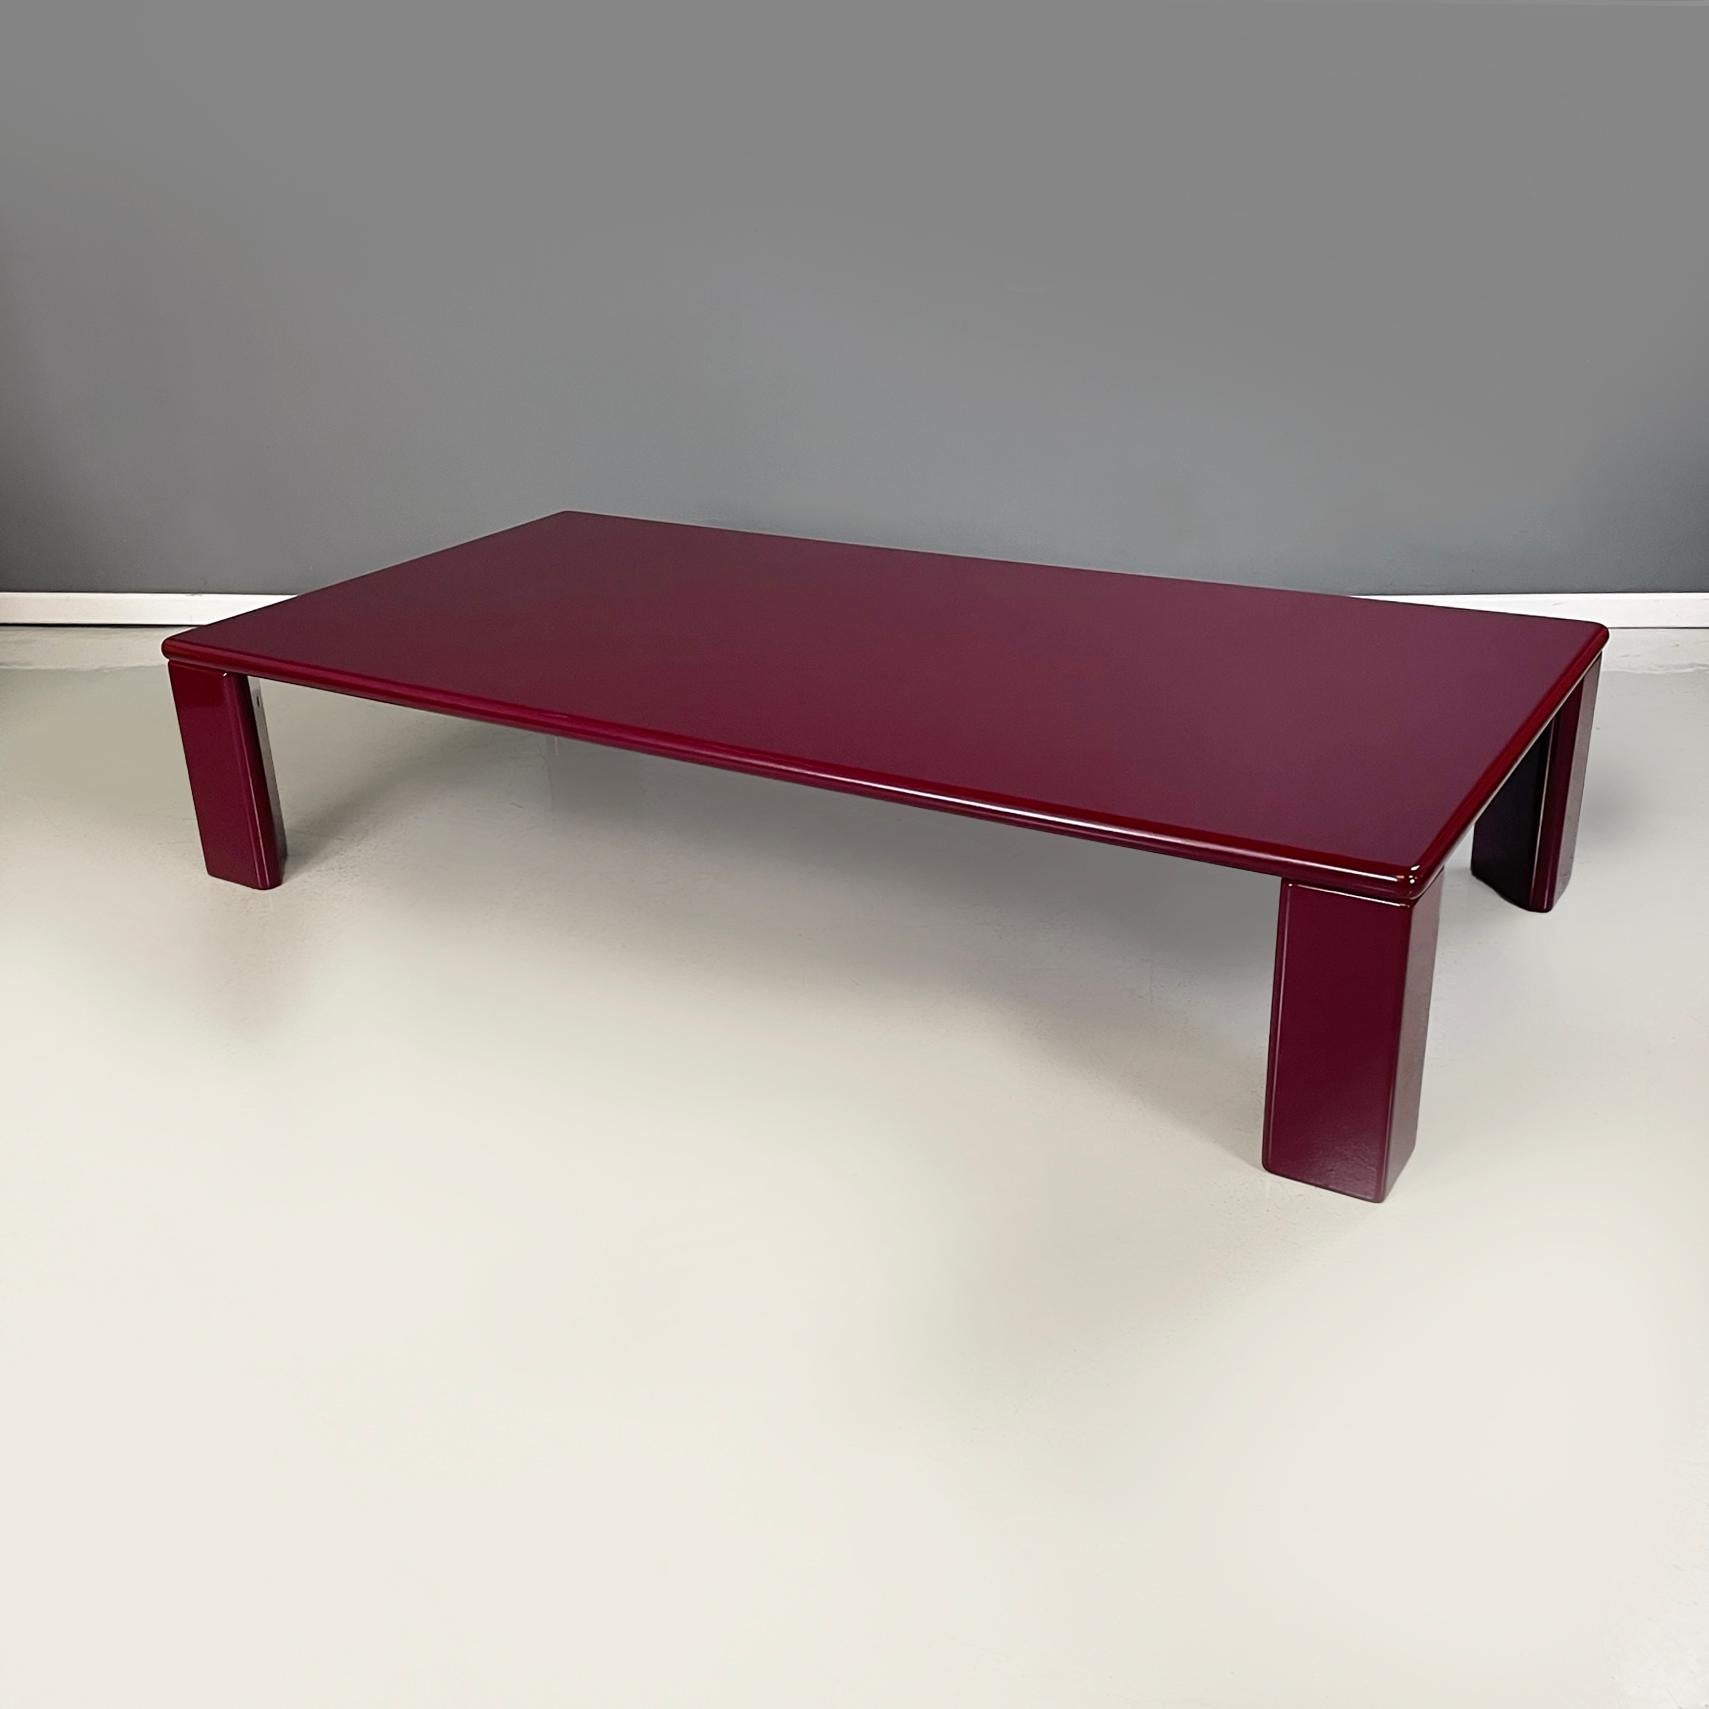 Italian Modern purple Wooden Coffee Table Ming by Takahama for Gavina, 1980s
Iconic and elegant coffee table mod. Ming with rectangular top with rounded corners, in purple lacquered wood. The 4 legs are triangular in shape with rounded